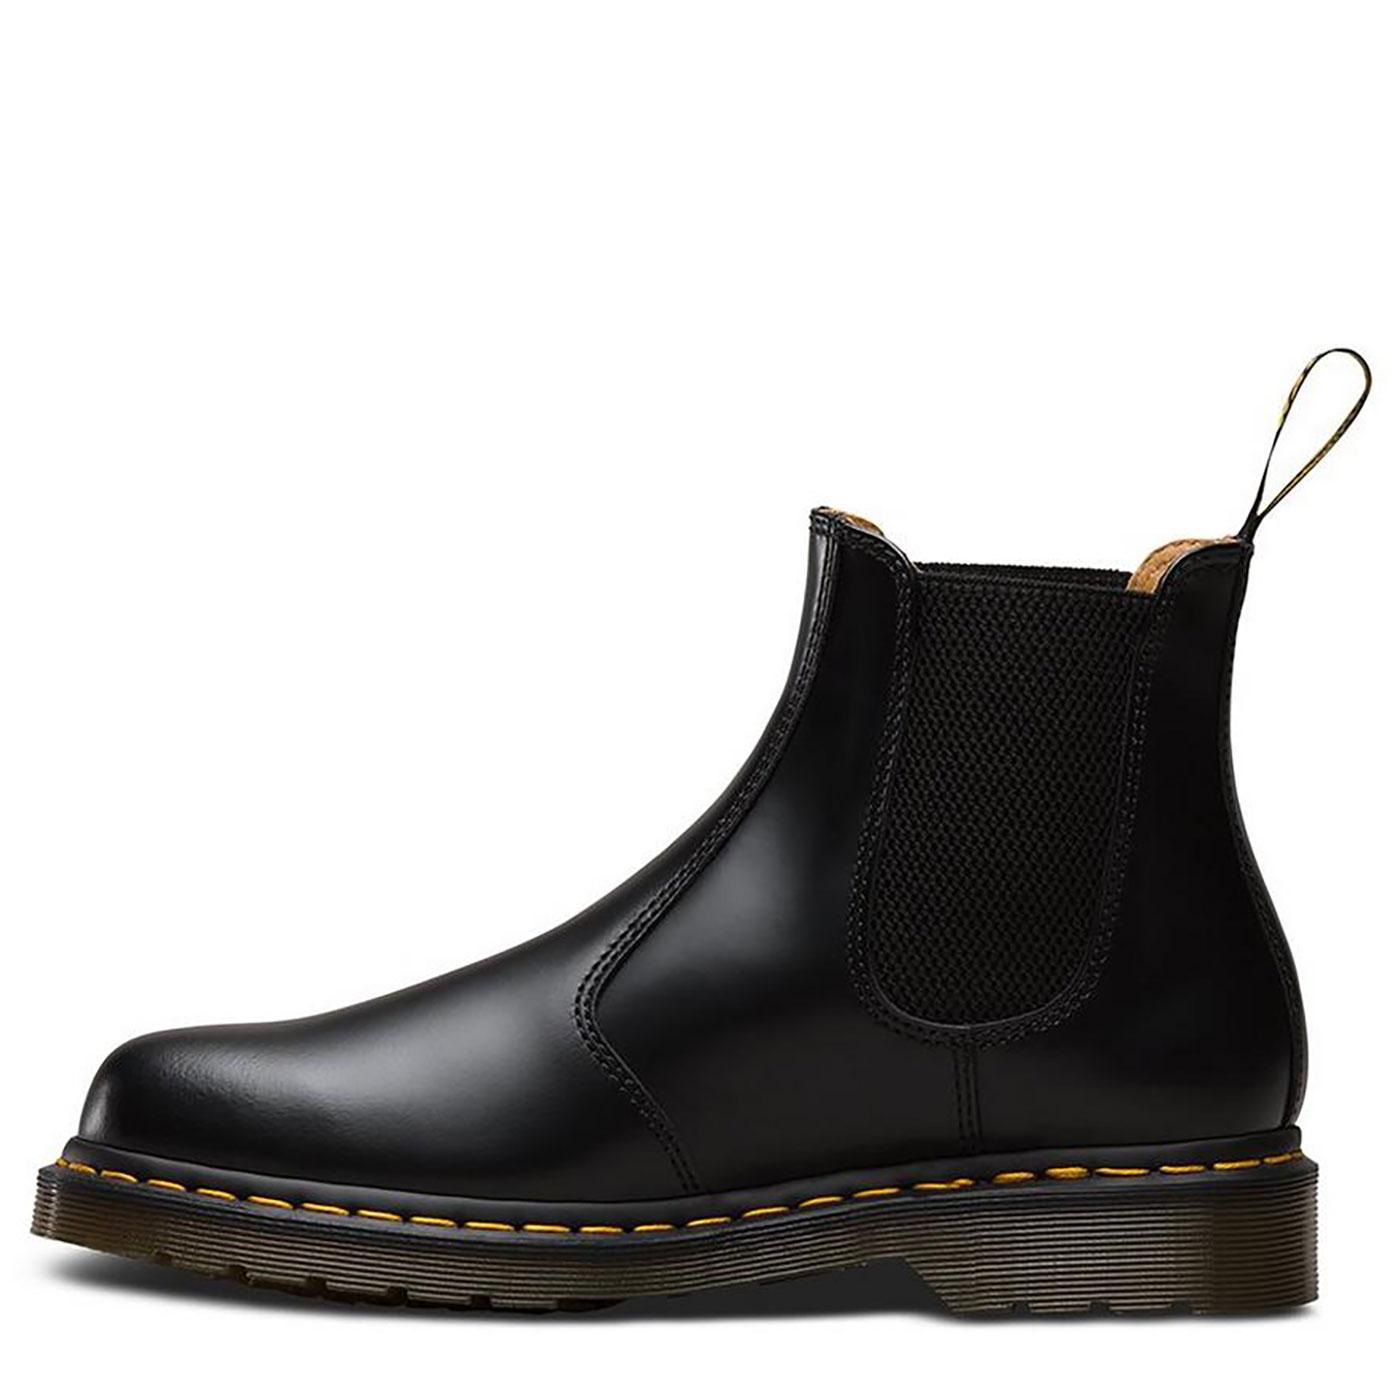 DR MARTENS 2976 Women's Chelsea Boots Black Smooth